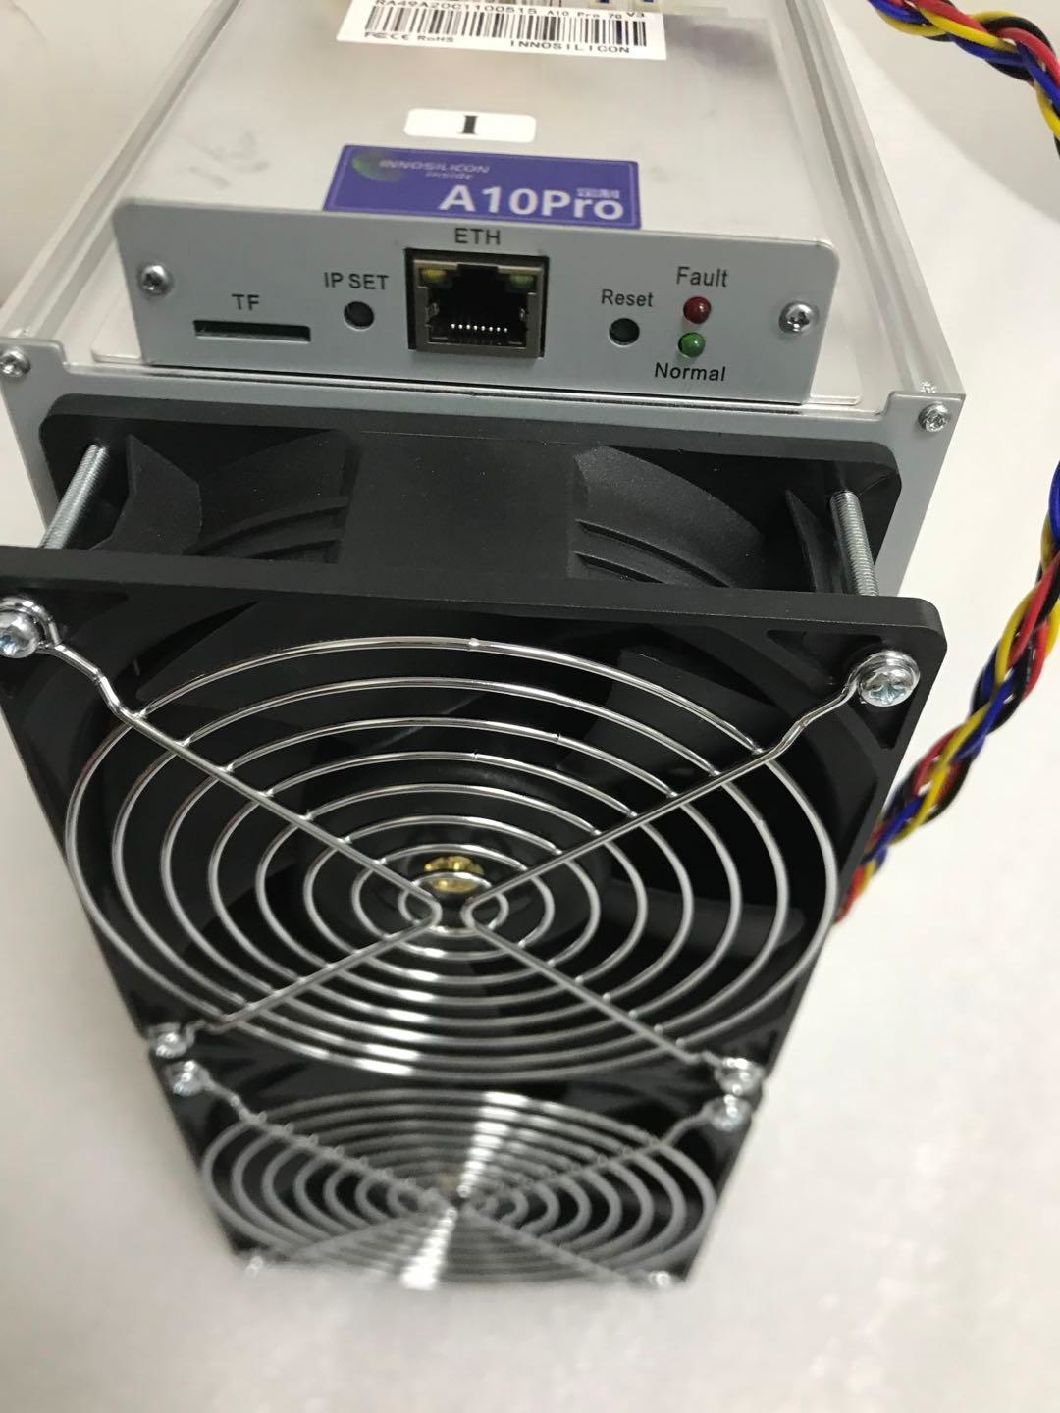 Second Hand Eth Mining Machine Innosilicon A10 PRO 6g 720m Used Asic Miner